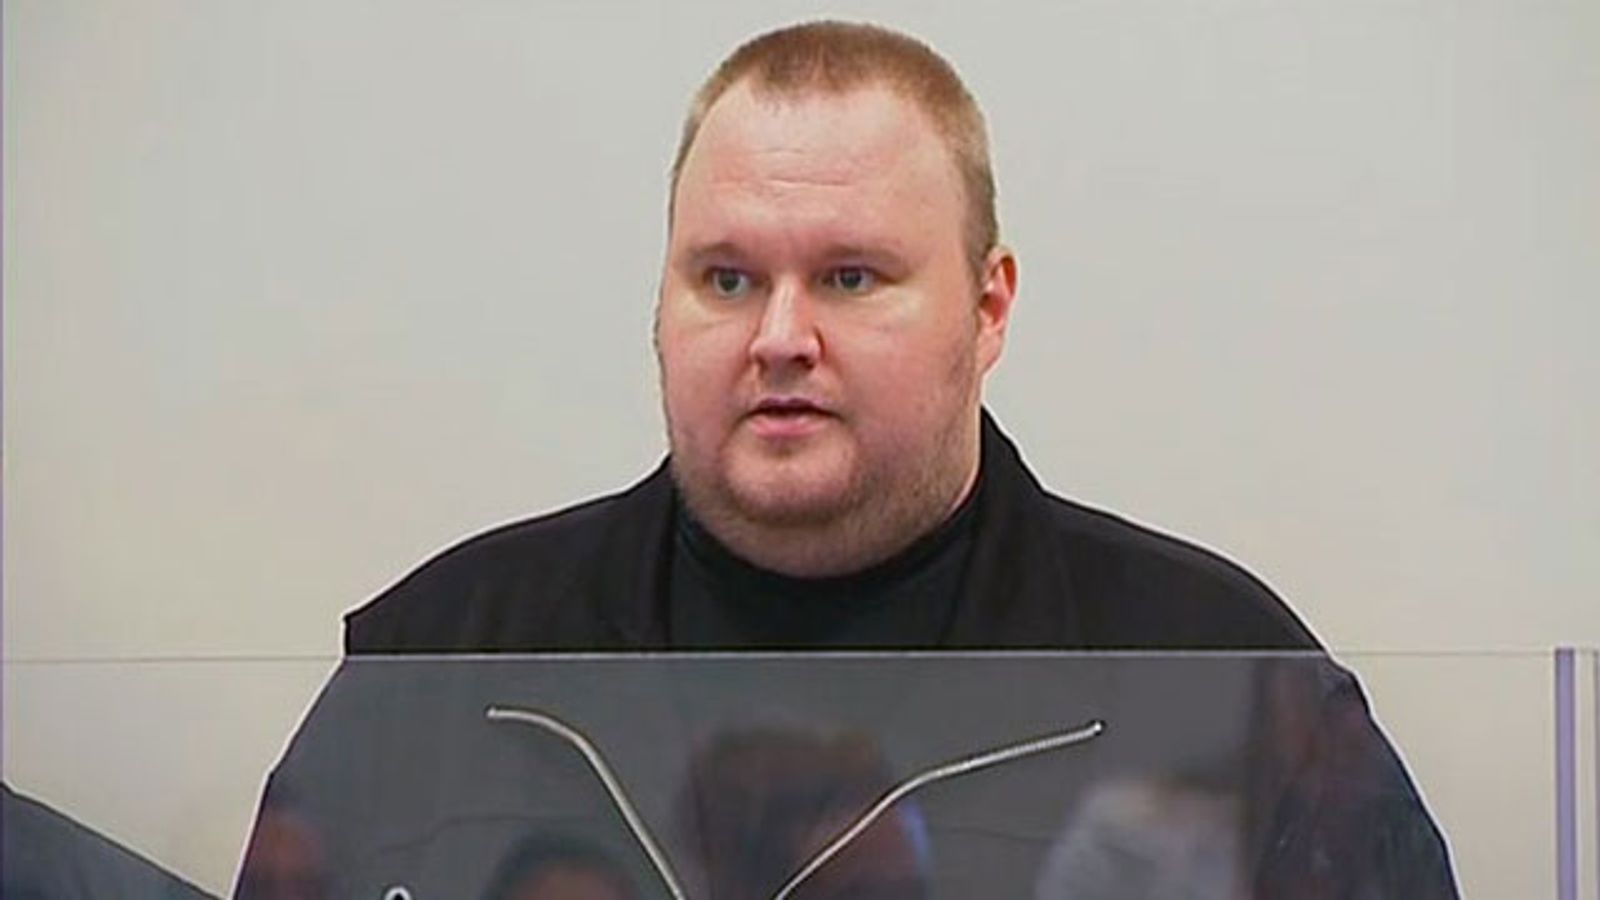 Dotcom Extradition Hearing Rescheduled for April 2014